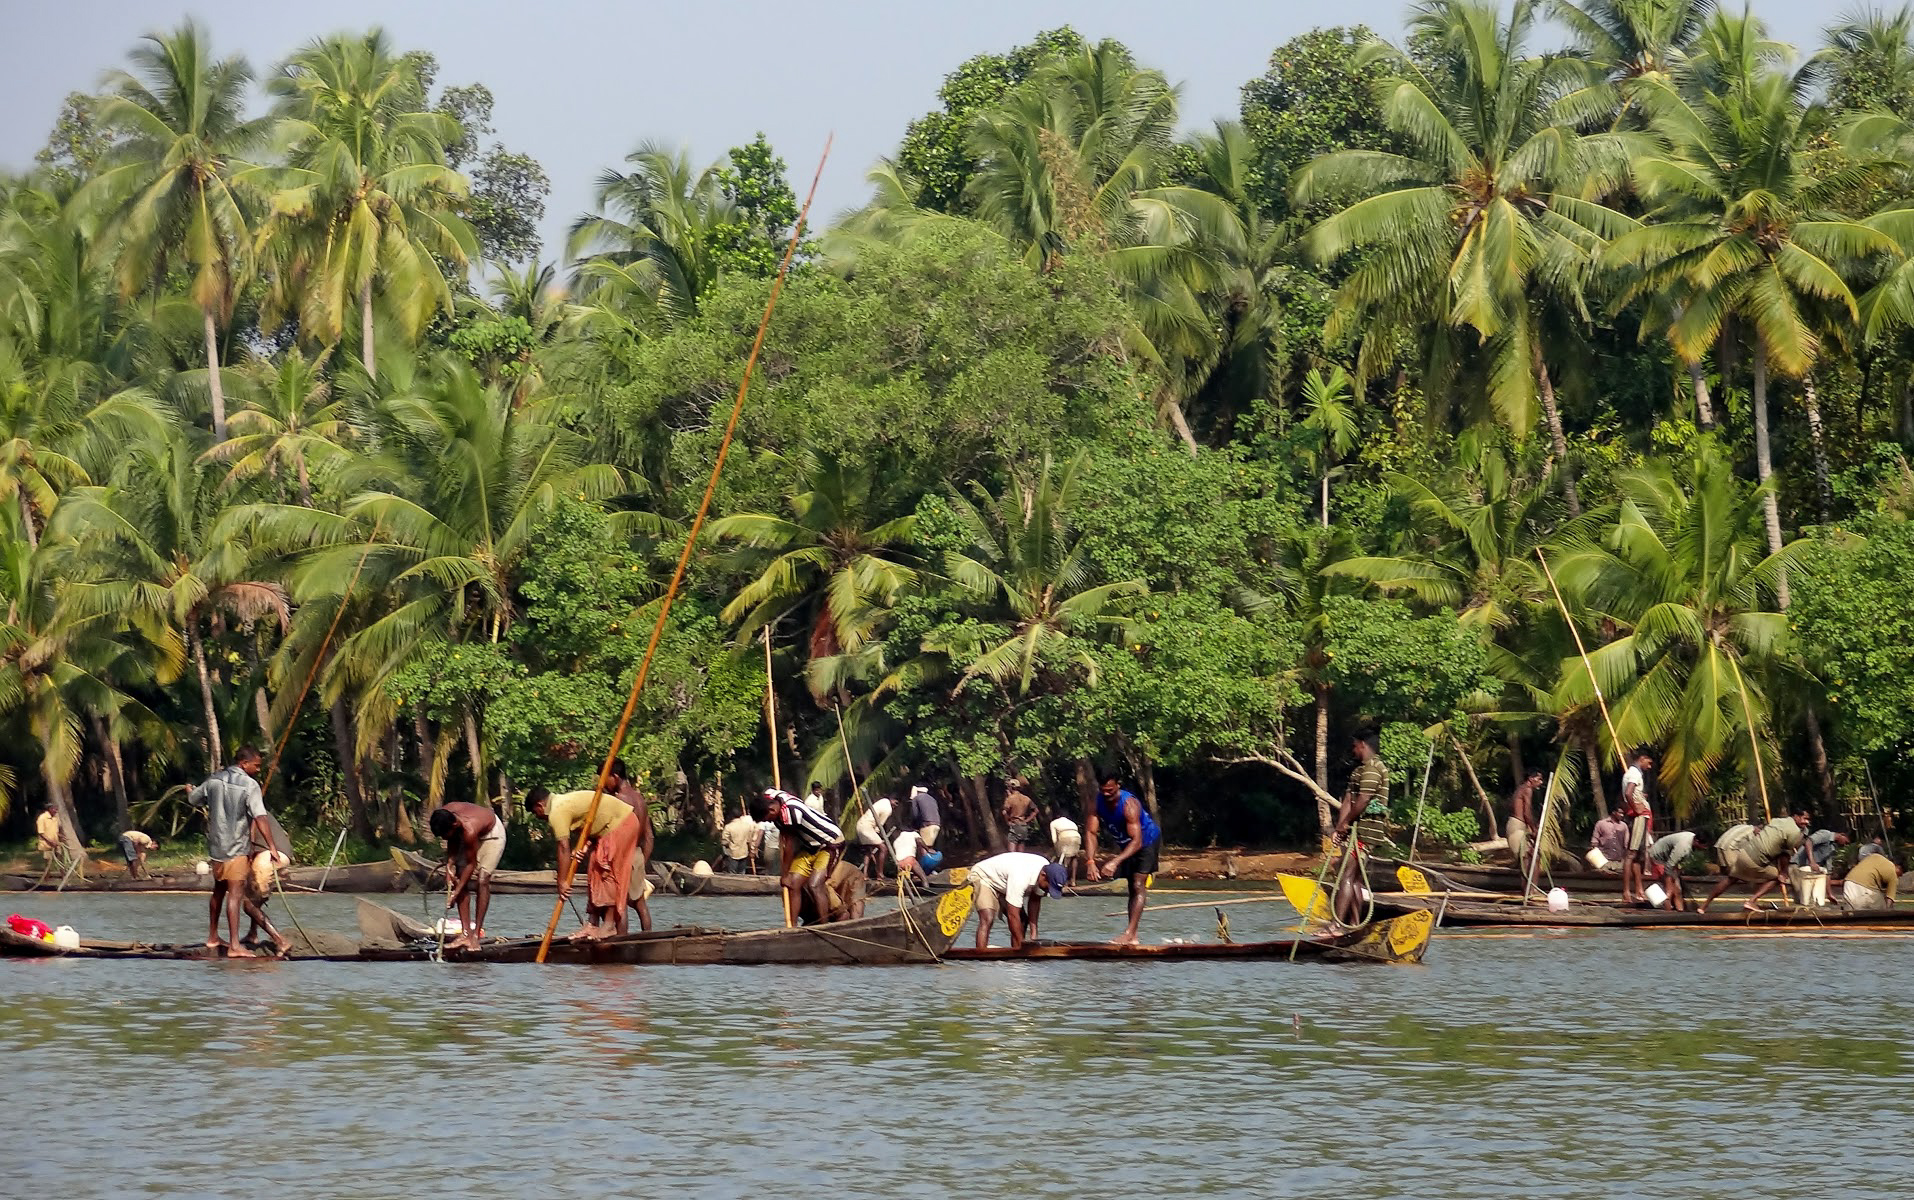 Indian men fishing from wooden boats in the Kappil Backwaters, Kerala, India